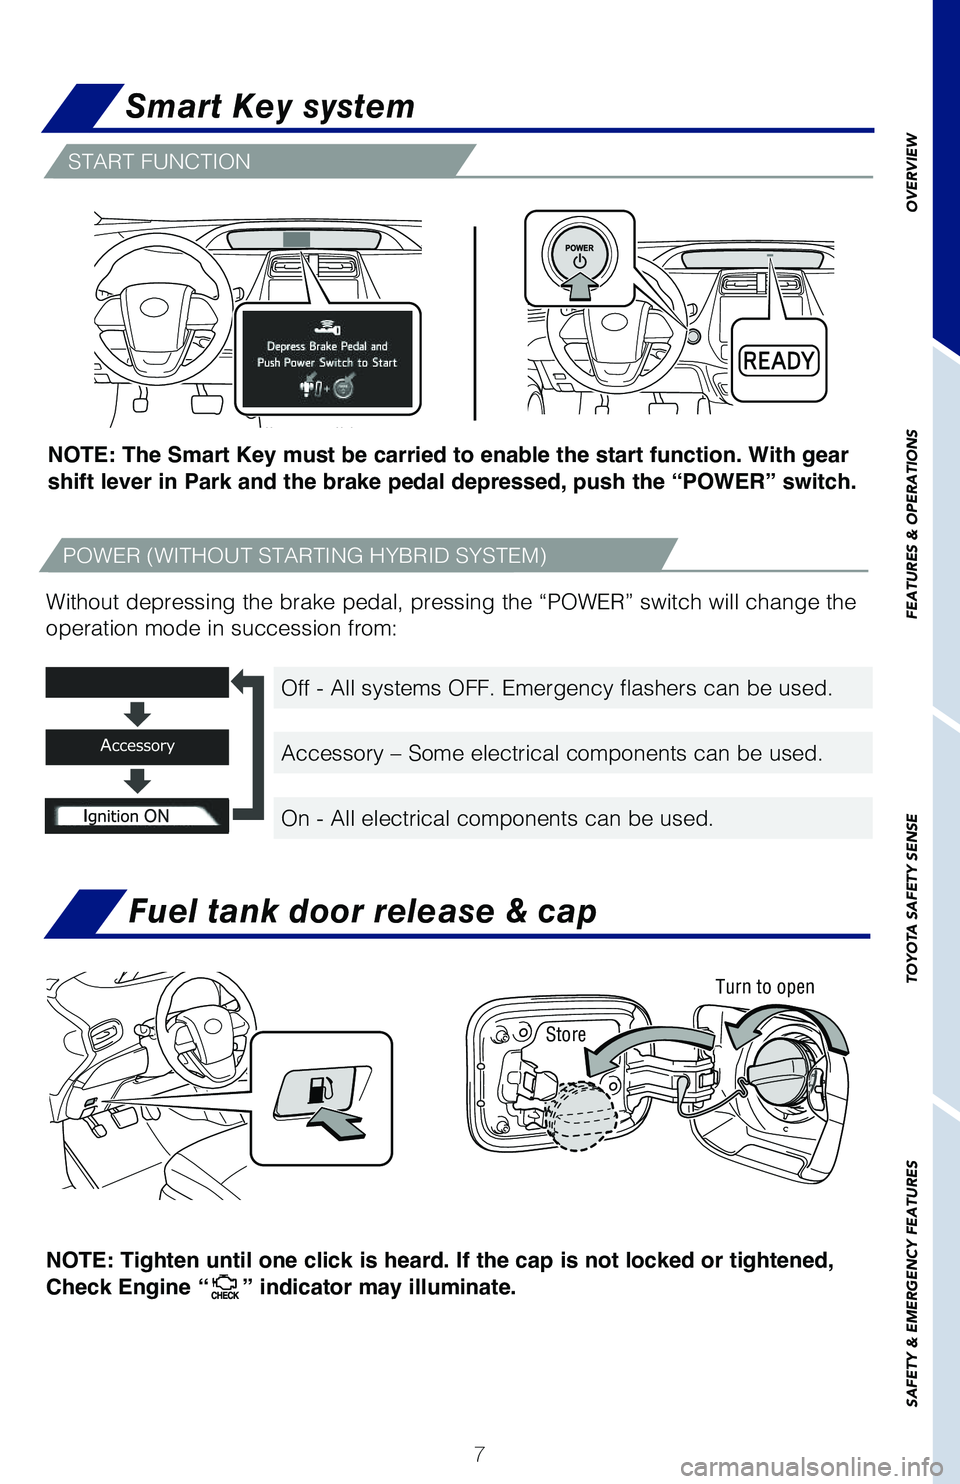 TOYOTA PRIUS 2019  Owners Manual (in English) 7
OVERVIEW
FEATURES & OPERATIONS
TOYOTA SAFETY SENSE
SAFETY & EMERGENCY FEATURES
START FUNCTION
Fuel tank door release & cap
NOTE: Tighten until one click is heard. If the cap is not locked or tighten